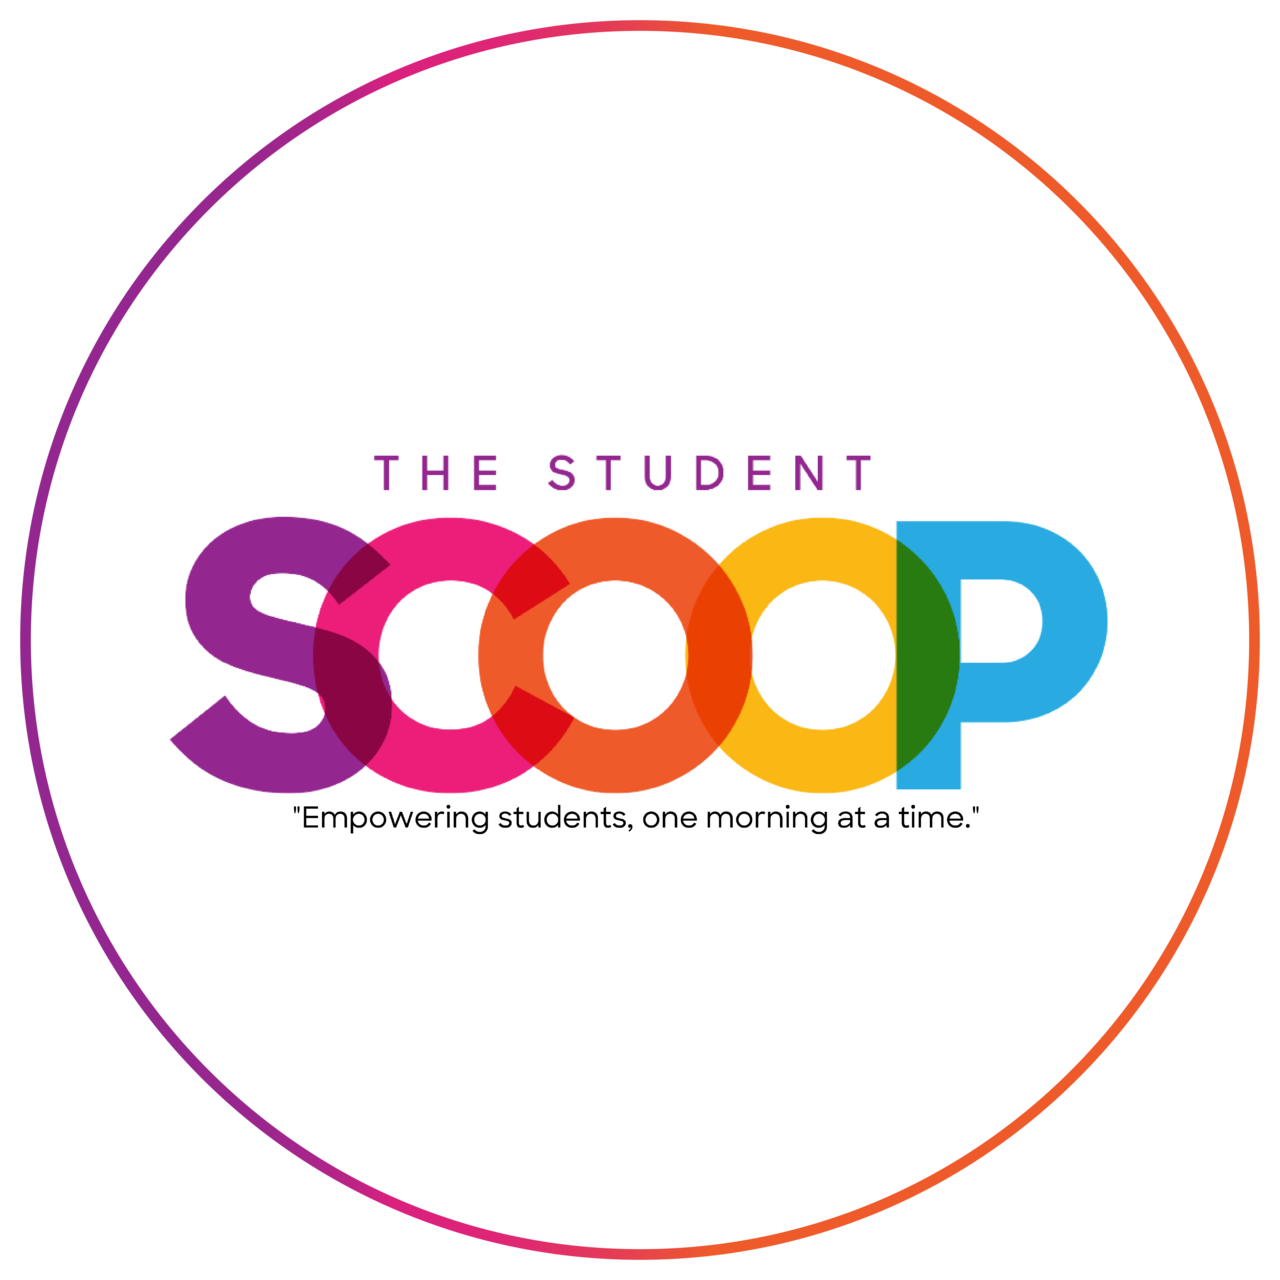 Artwork for The Student Scoop